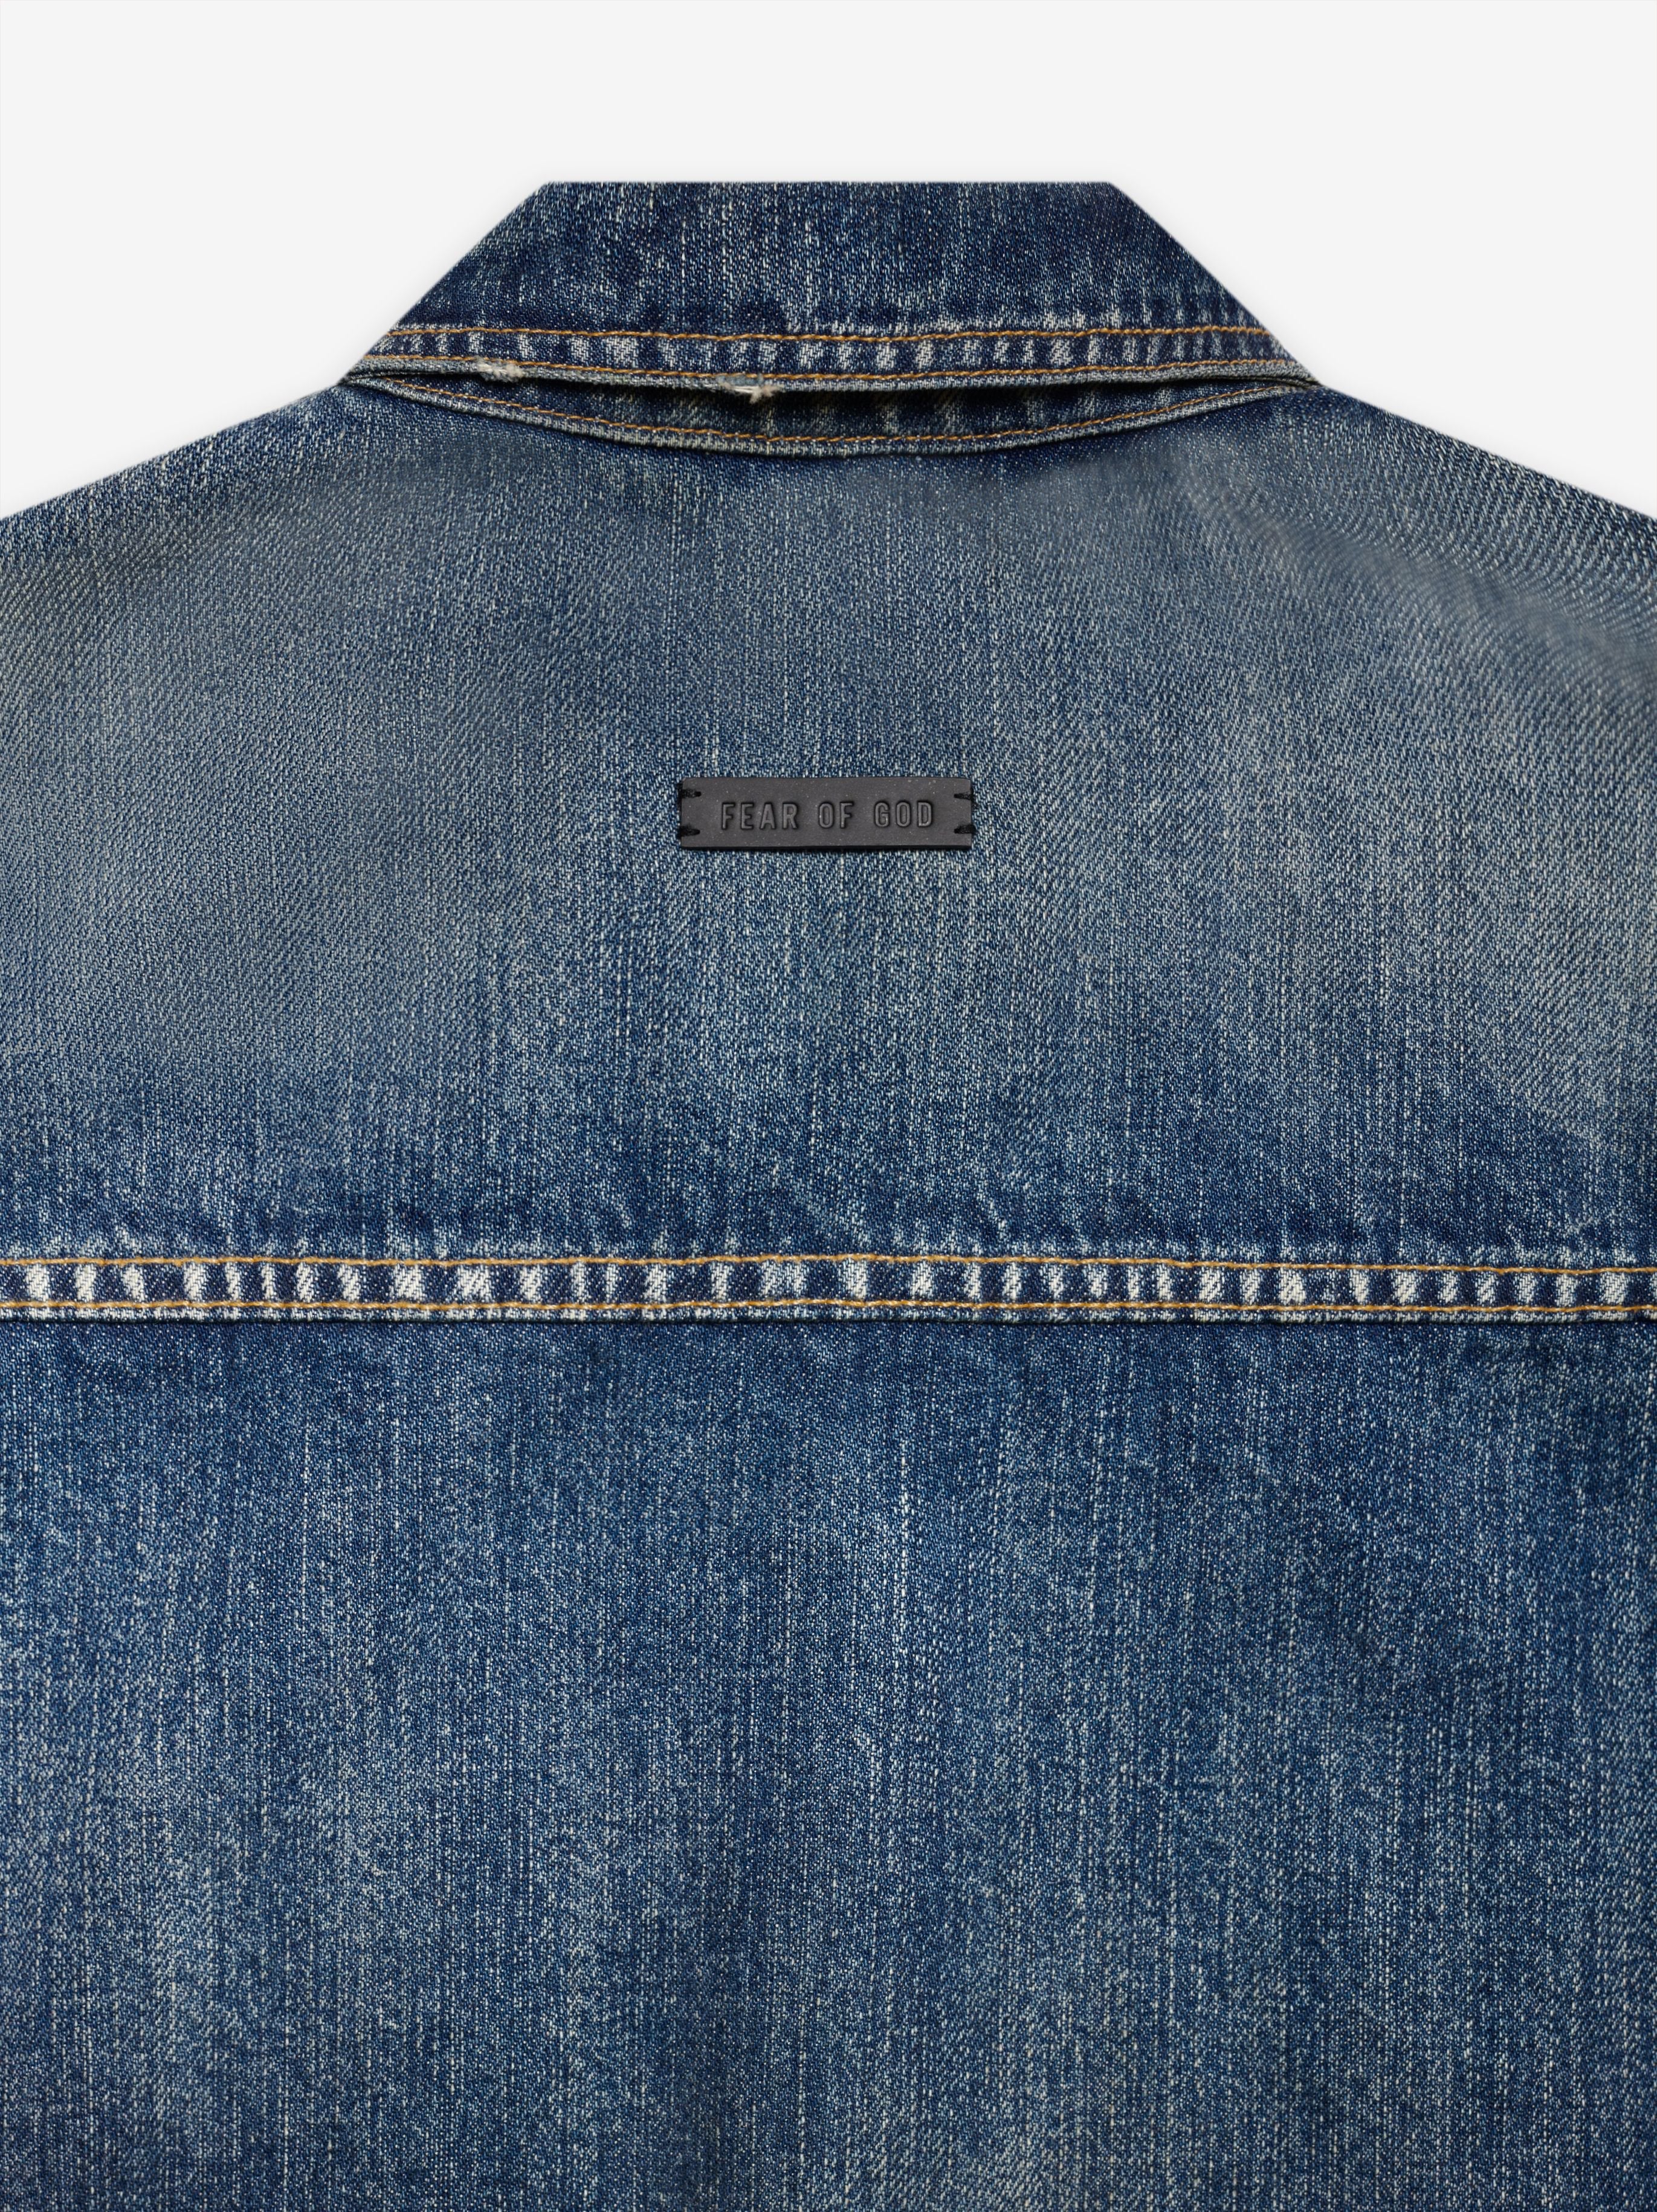 SEVENTH COLLECTION Denim Trucker Jacket in 3 Year Wash | Fear of God